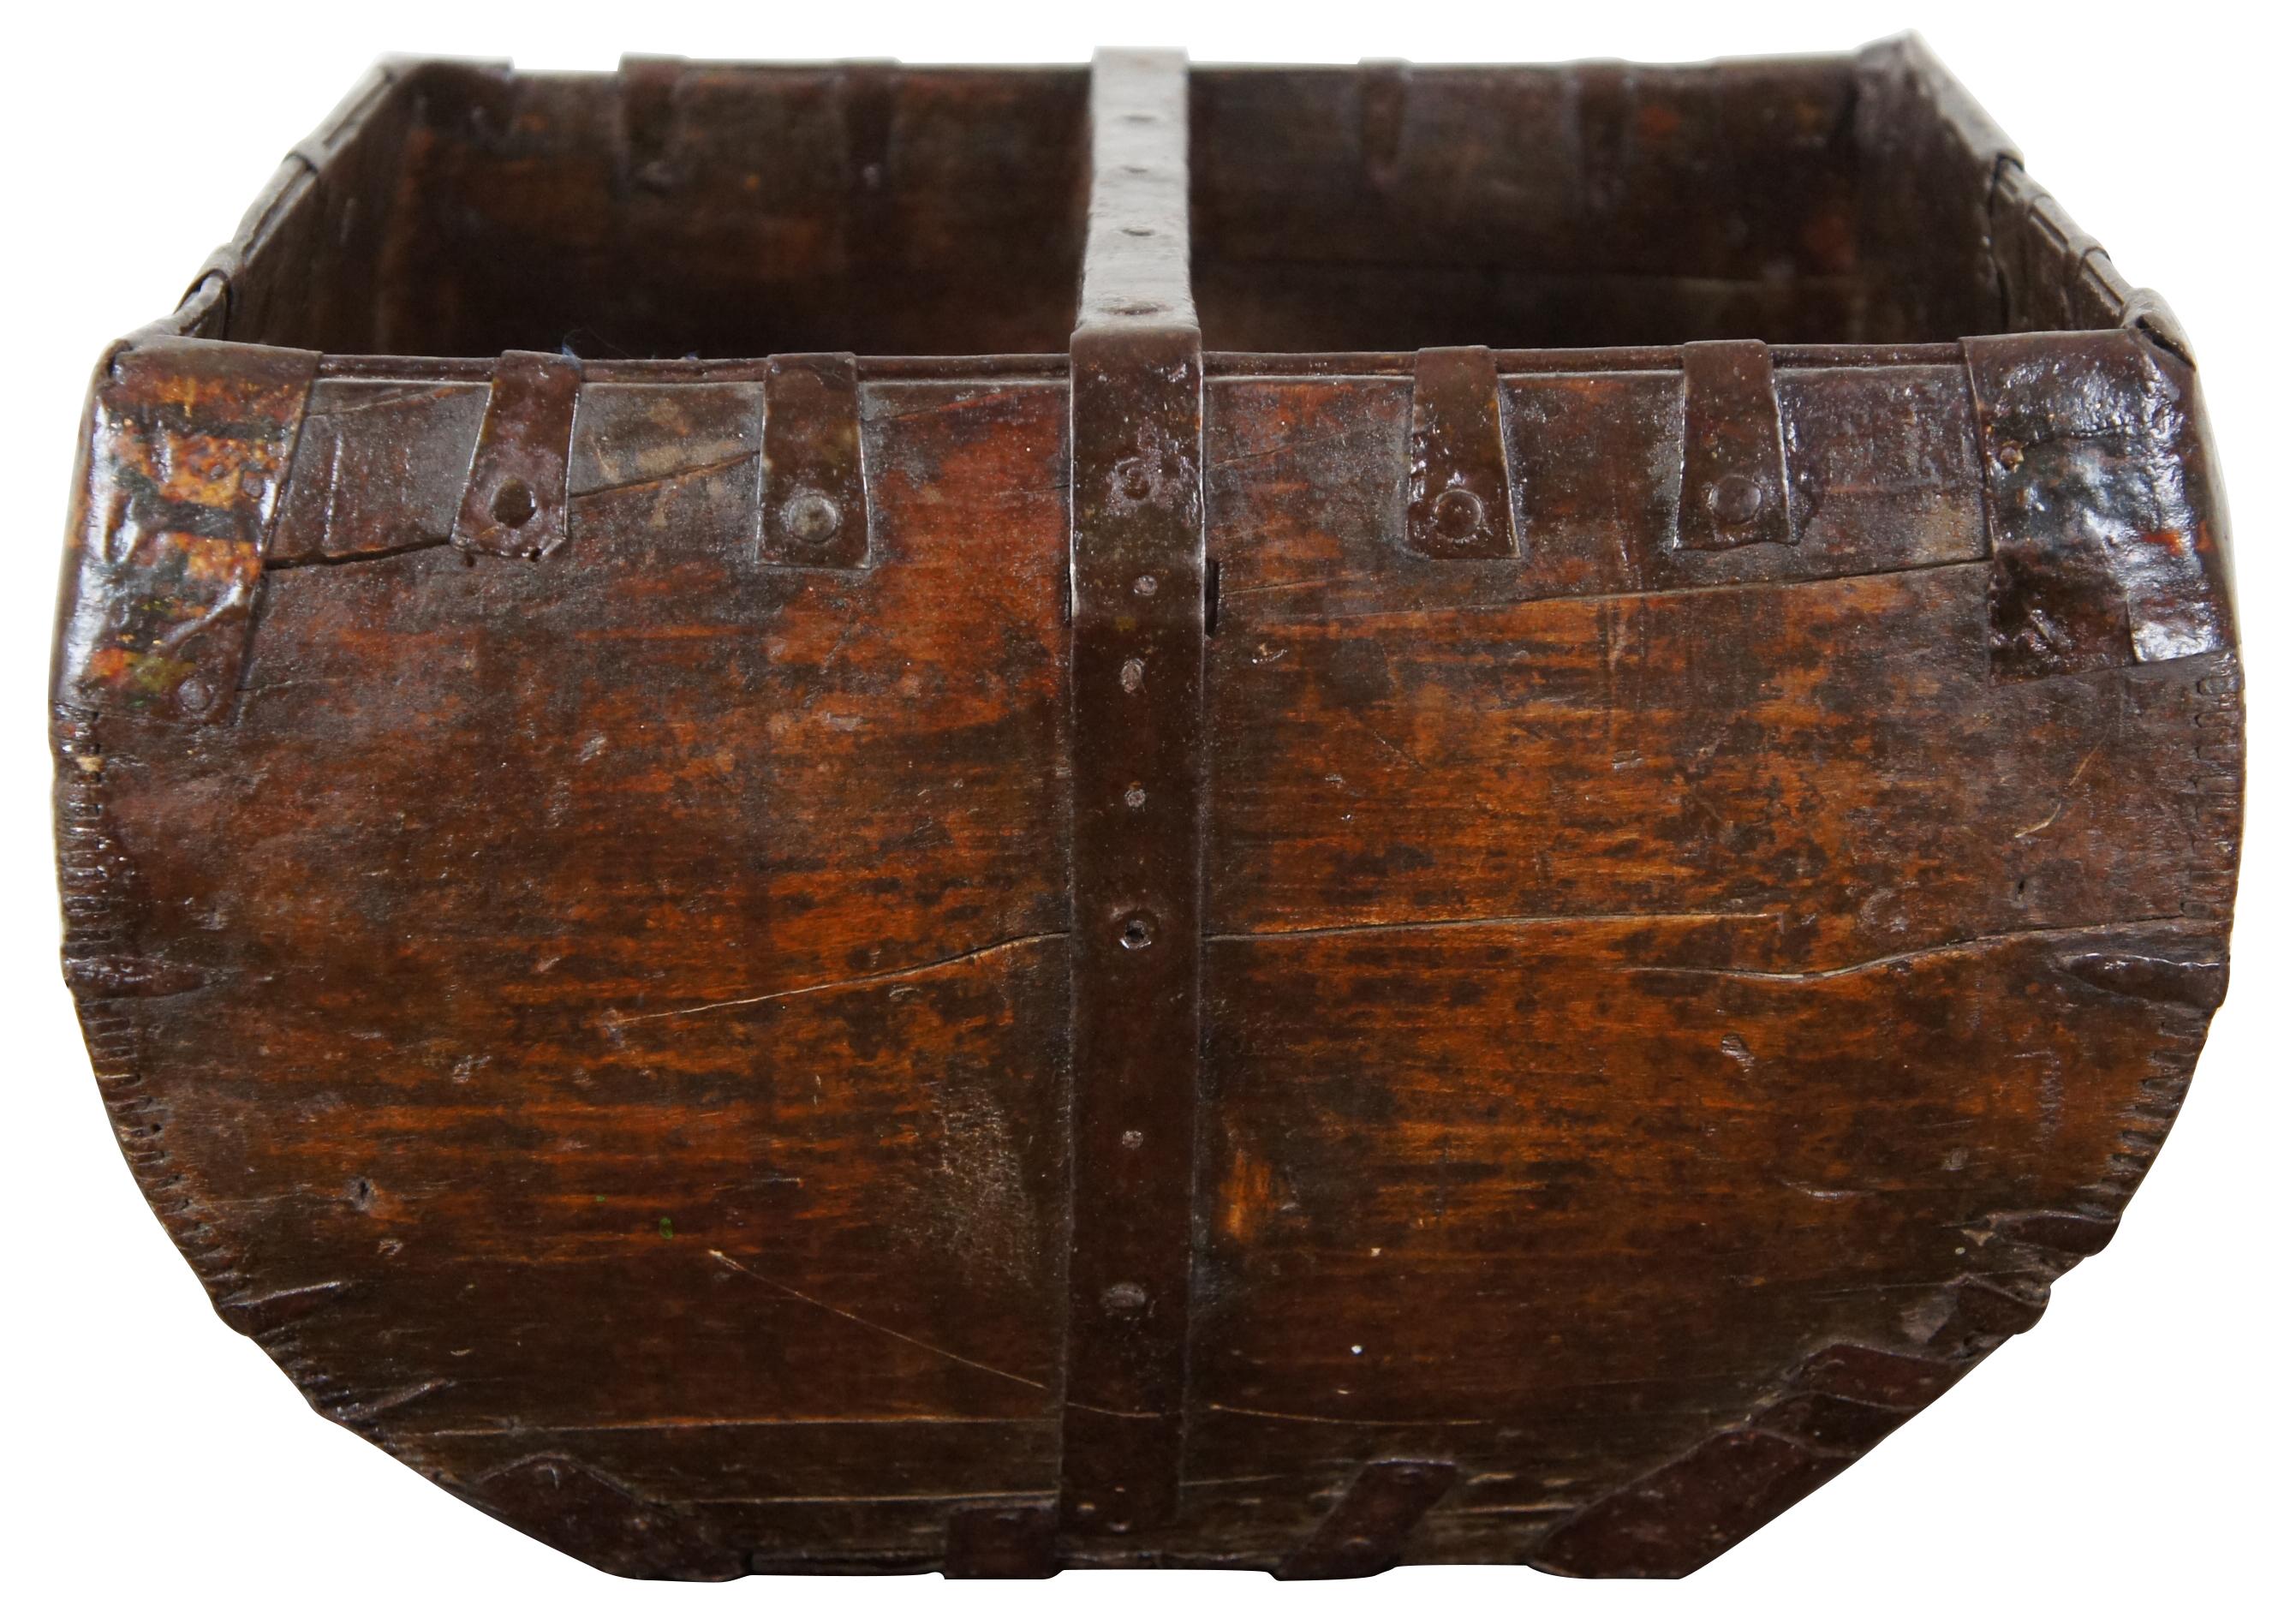 Antique wooden grain or rice measure / harvesting bucket with handle across the middle and primitive iron accents.
  